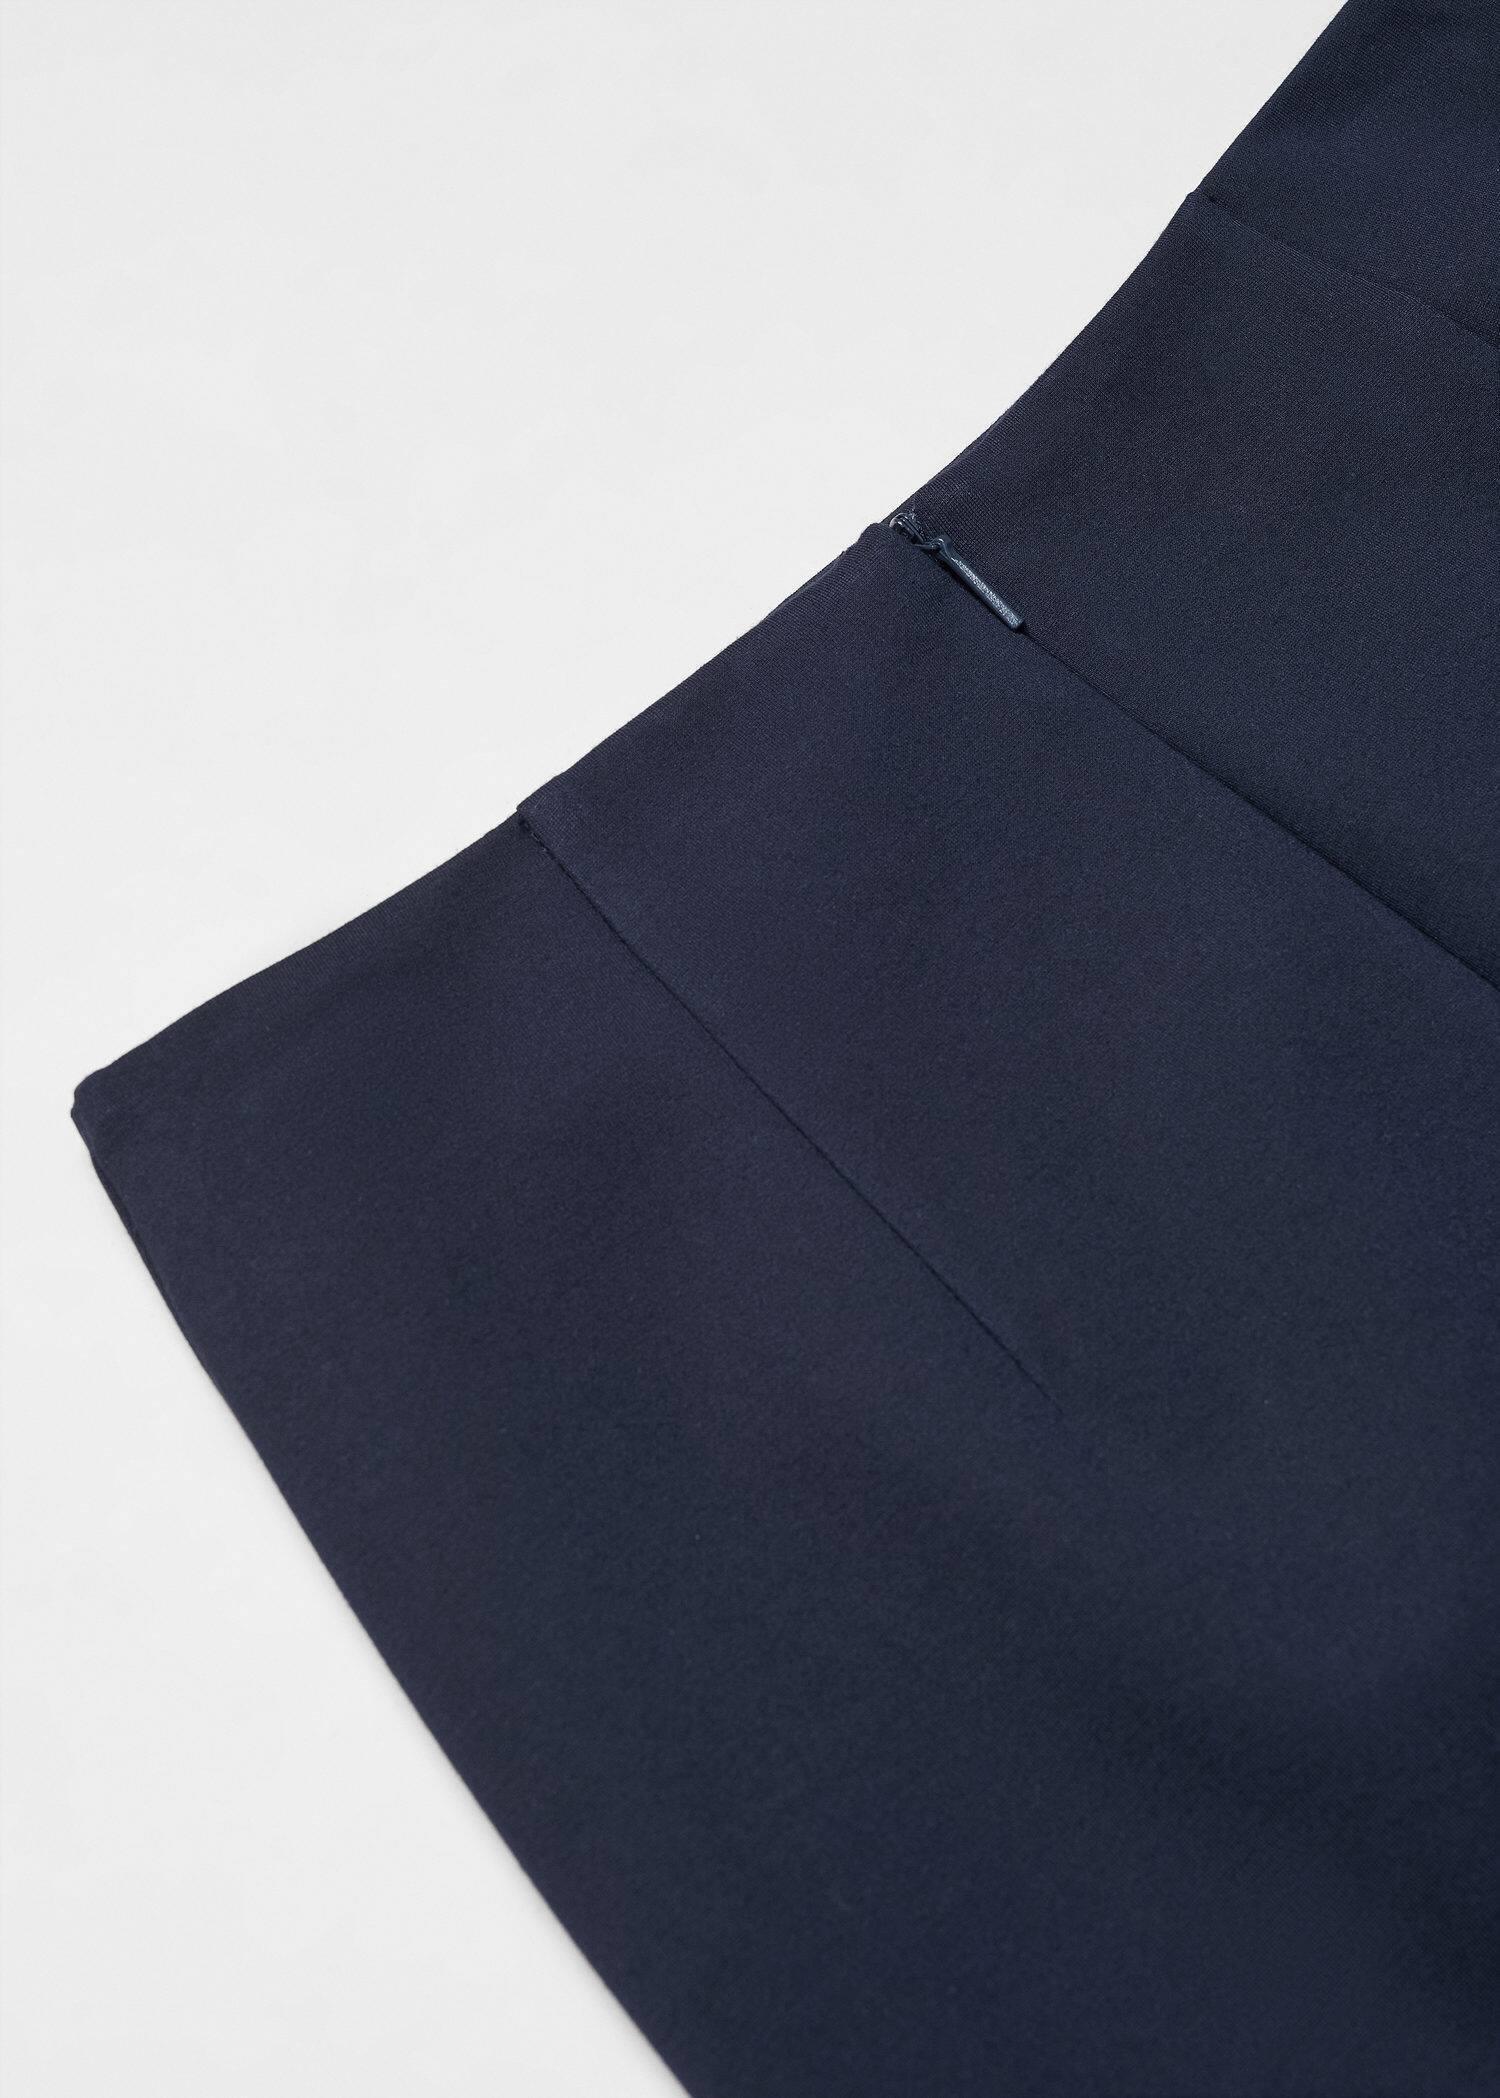 Mango - Navy Pencil Skirt With Rome-Knit Opening